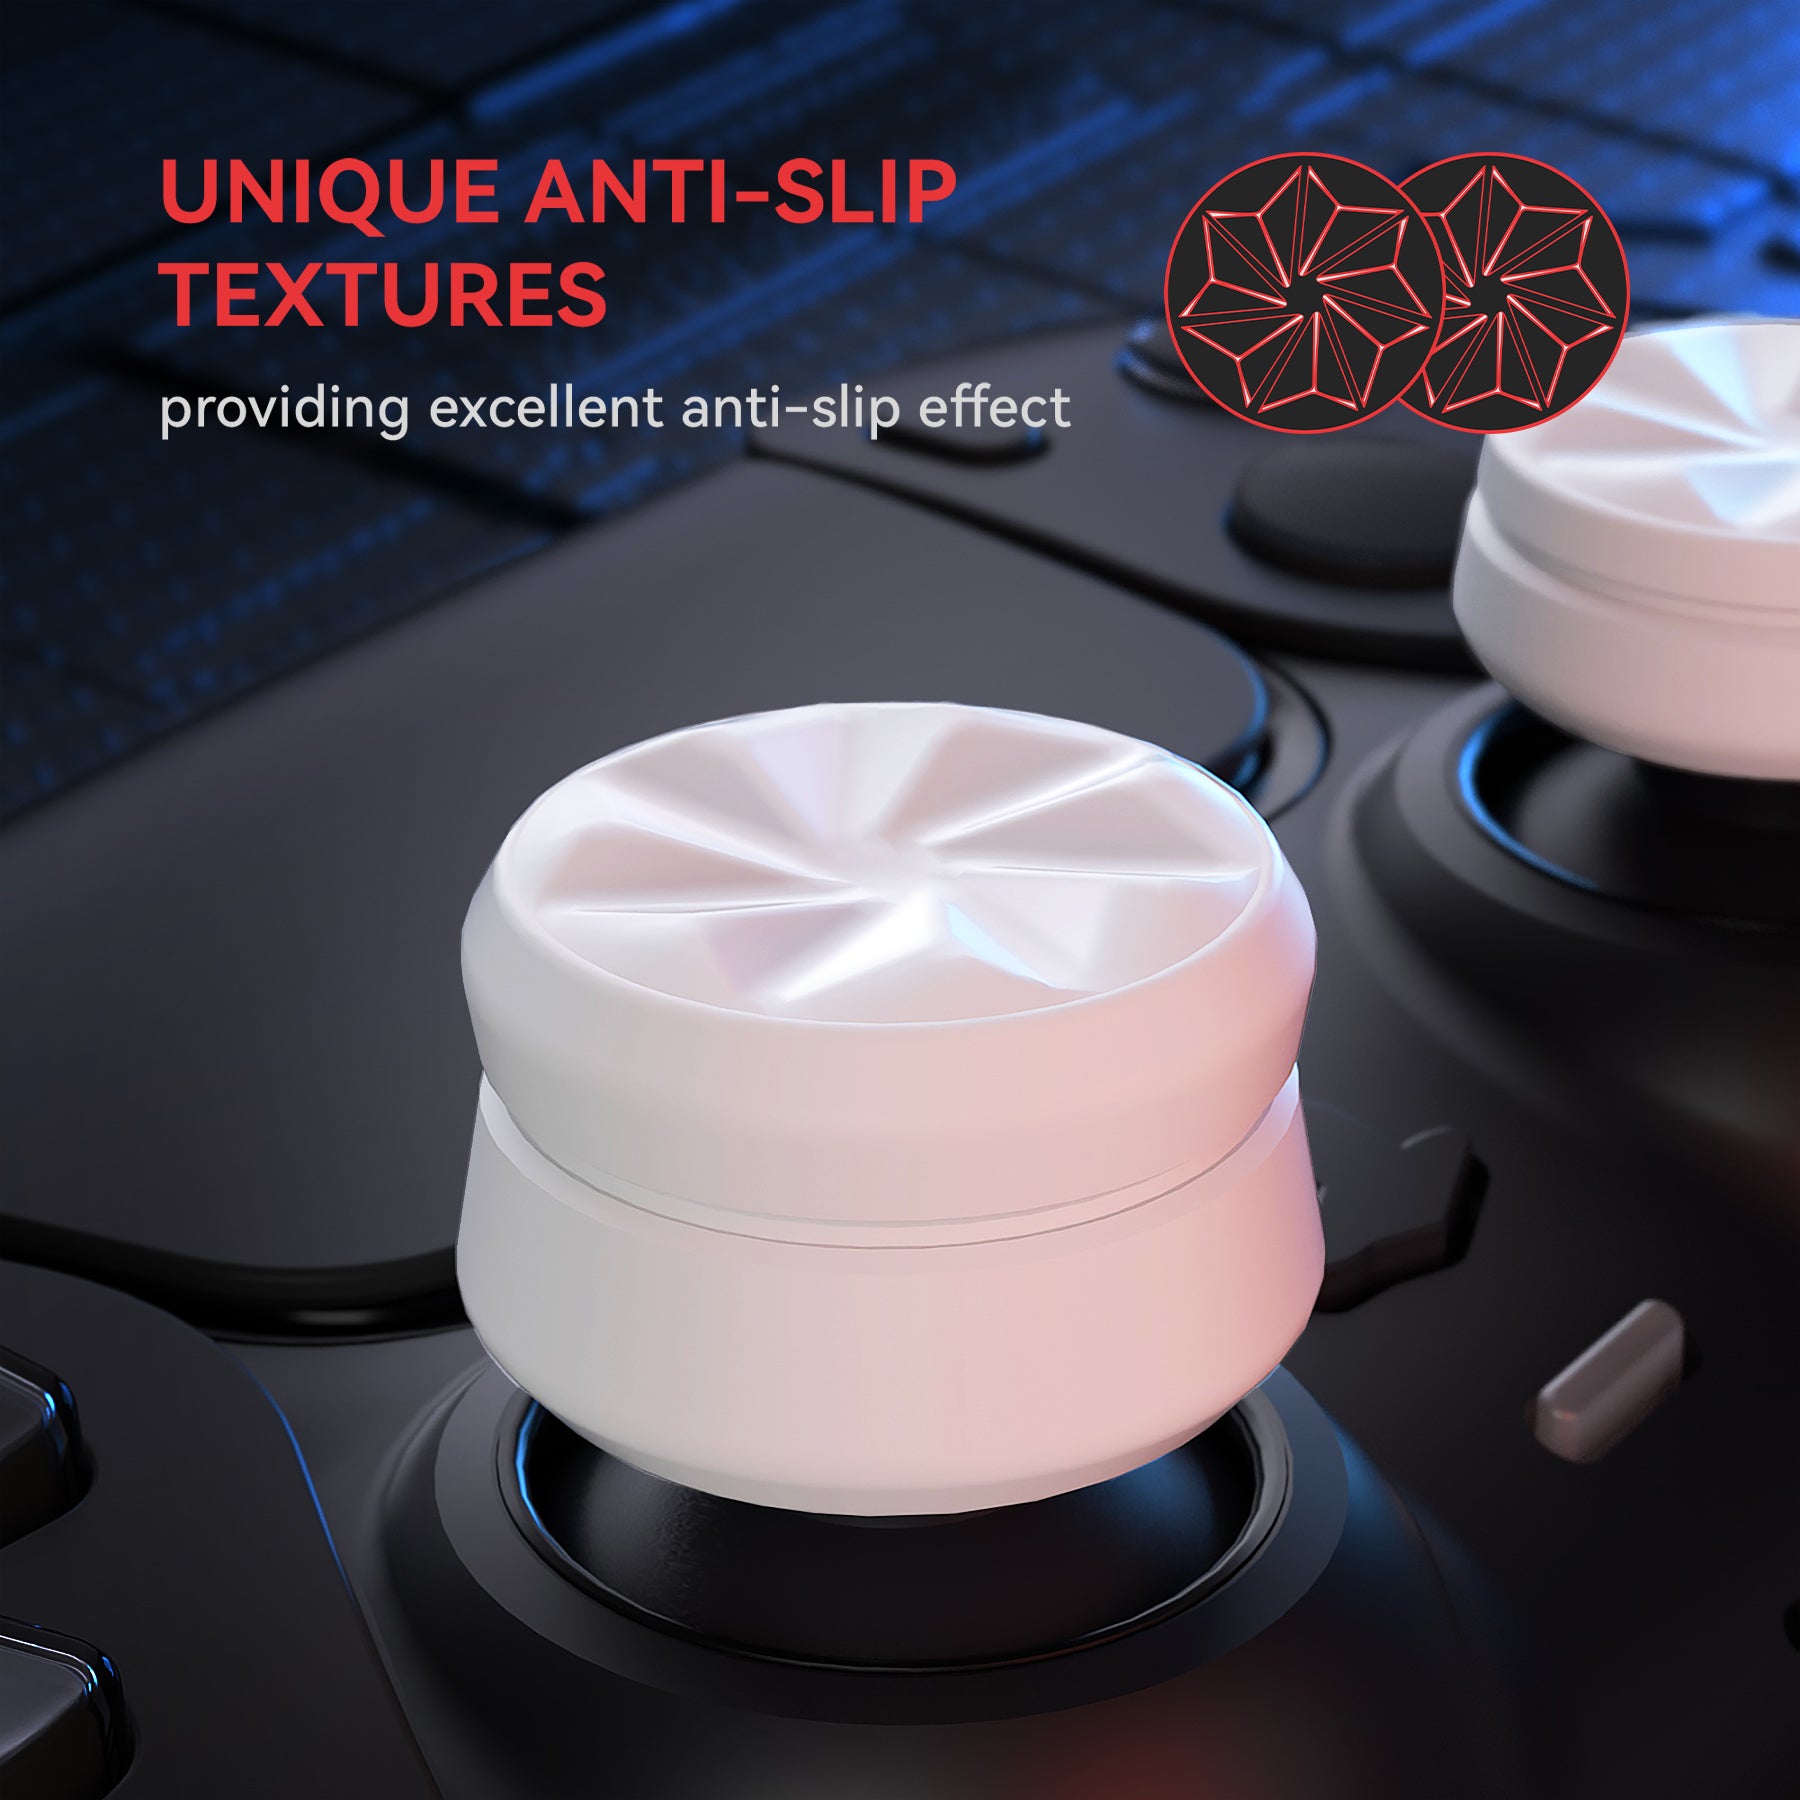 PlayVital 3 Height Hurricane Thumbs Cushion Caps Thumb Grips for ps5, for ps4, Thumbstick Grip Cover for Xbox Core Wireless Controller, Thumb Grips for Xbox One, Elite Series 2, for Switch Pro - White - PJM3063 PlayVital